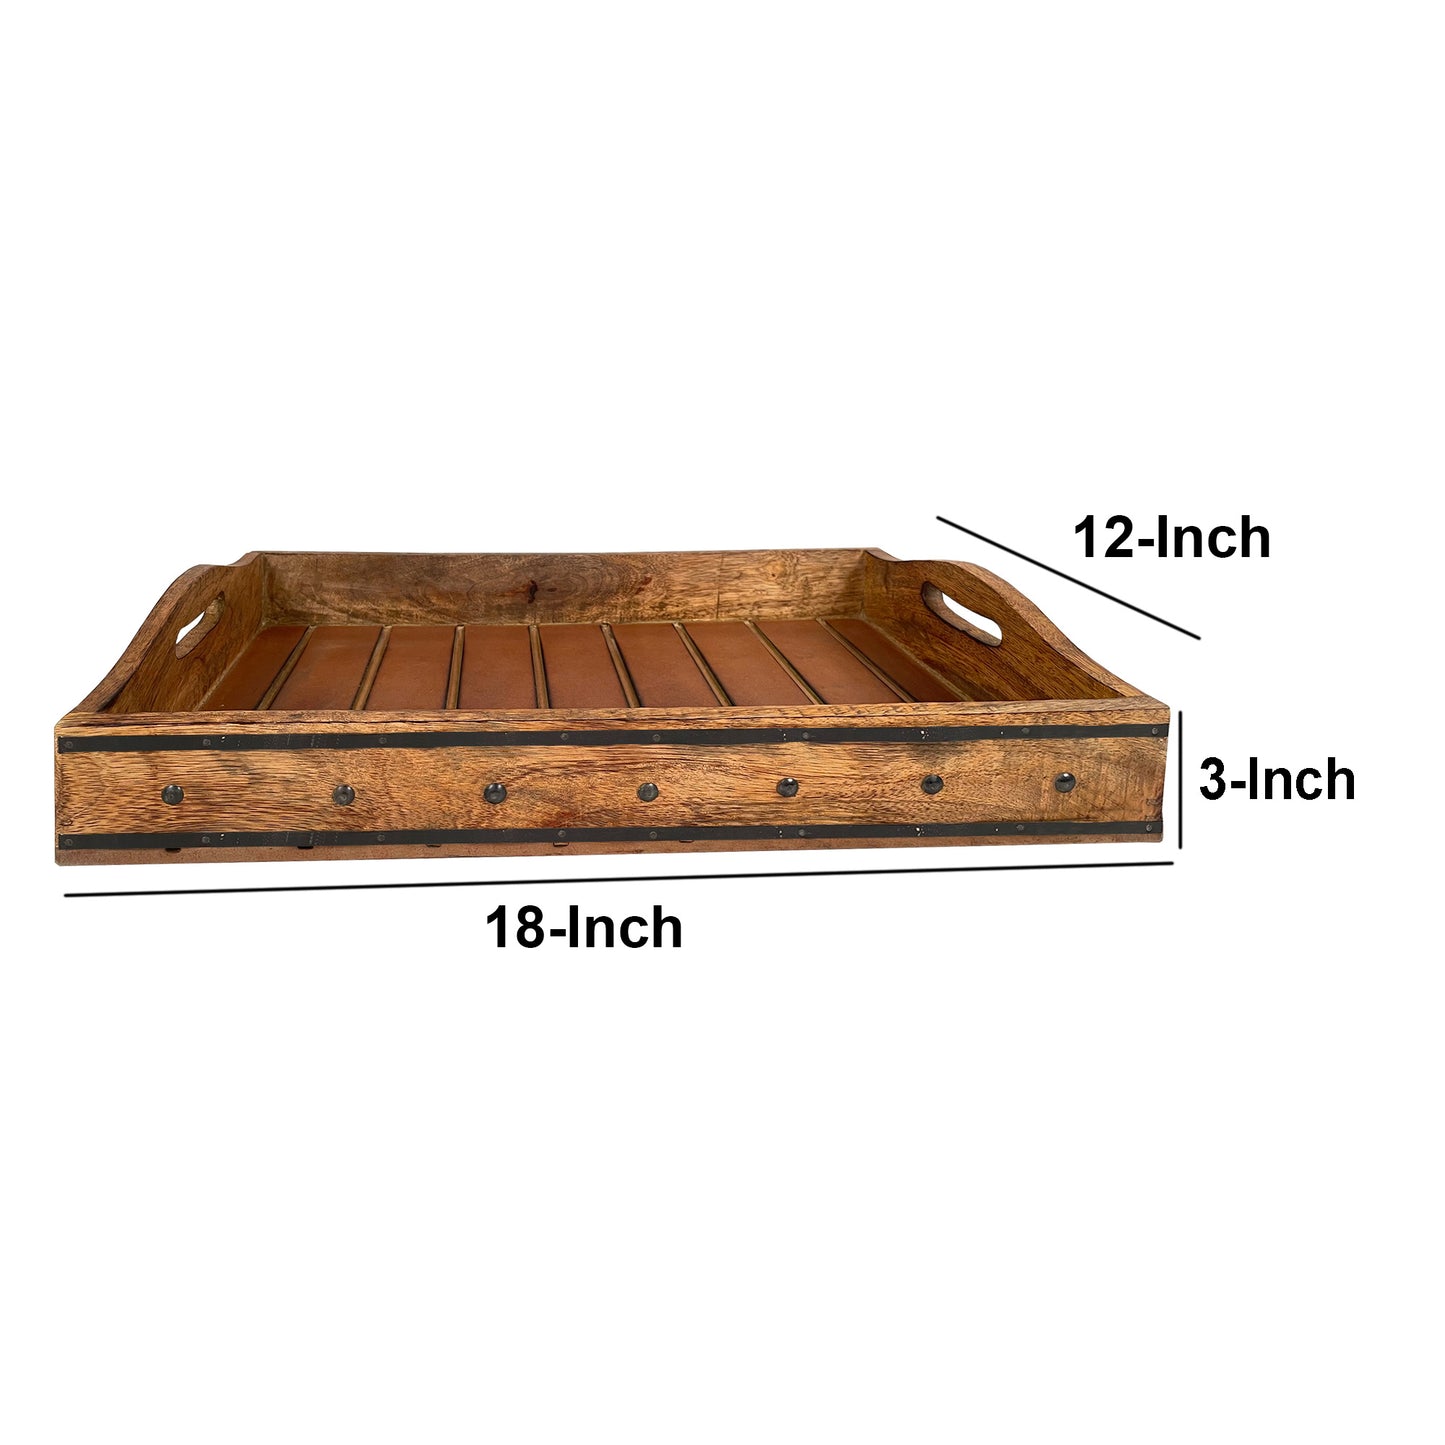 18 Inch Handcrafted Rectangular Mango Wood Decorative Serving Tray, Rivet Accents, Metal Trim, Natural Brown